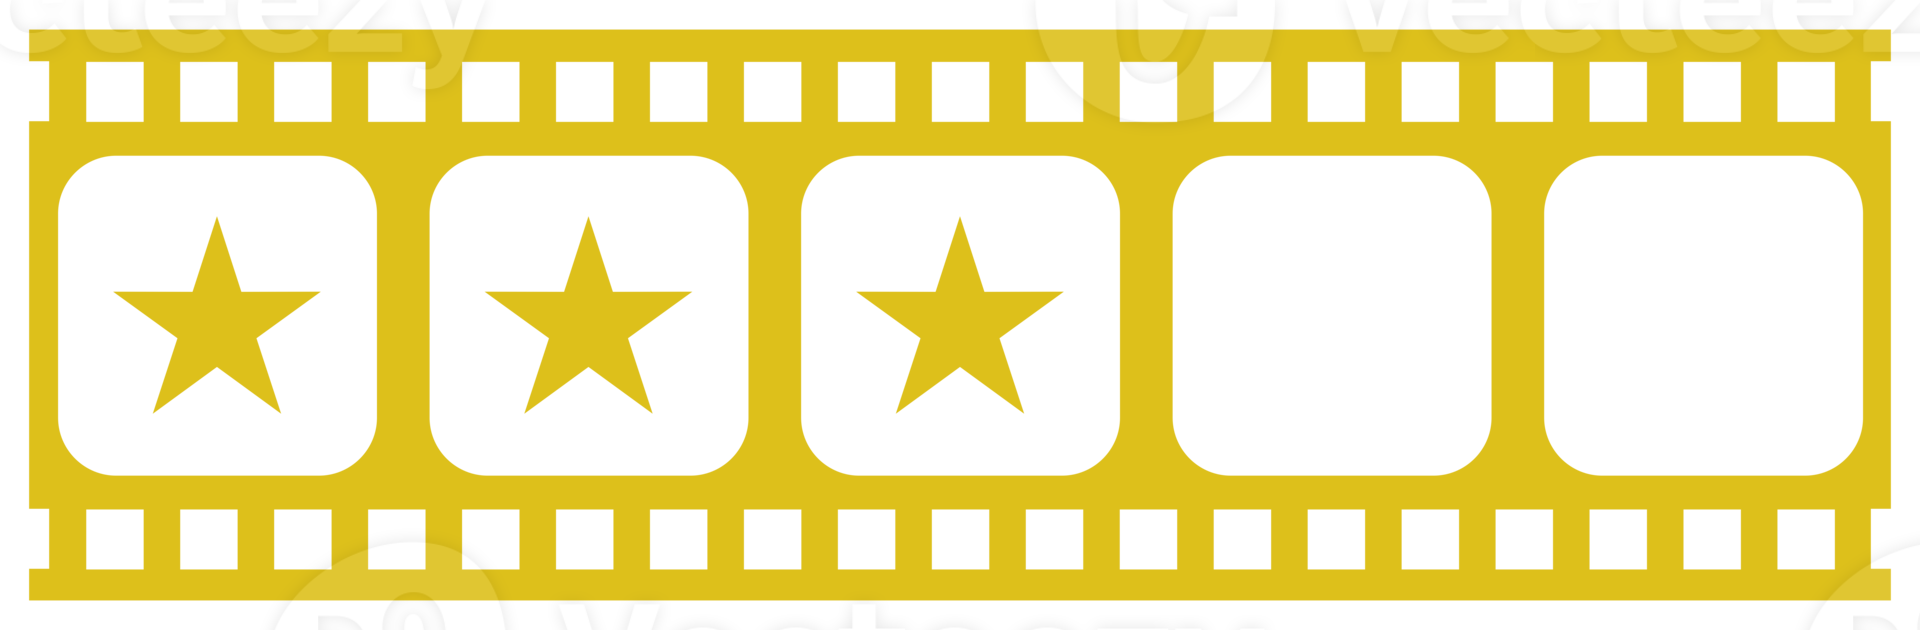 Visual of the Five 5 Star Sign in the Film Stripe Silhouette. Star Rating Icon Symbol for Film or Movie Review, Pictogram, Apps, Website or Graphic Design Element. Rating 3 Star. Format PNG